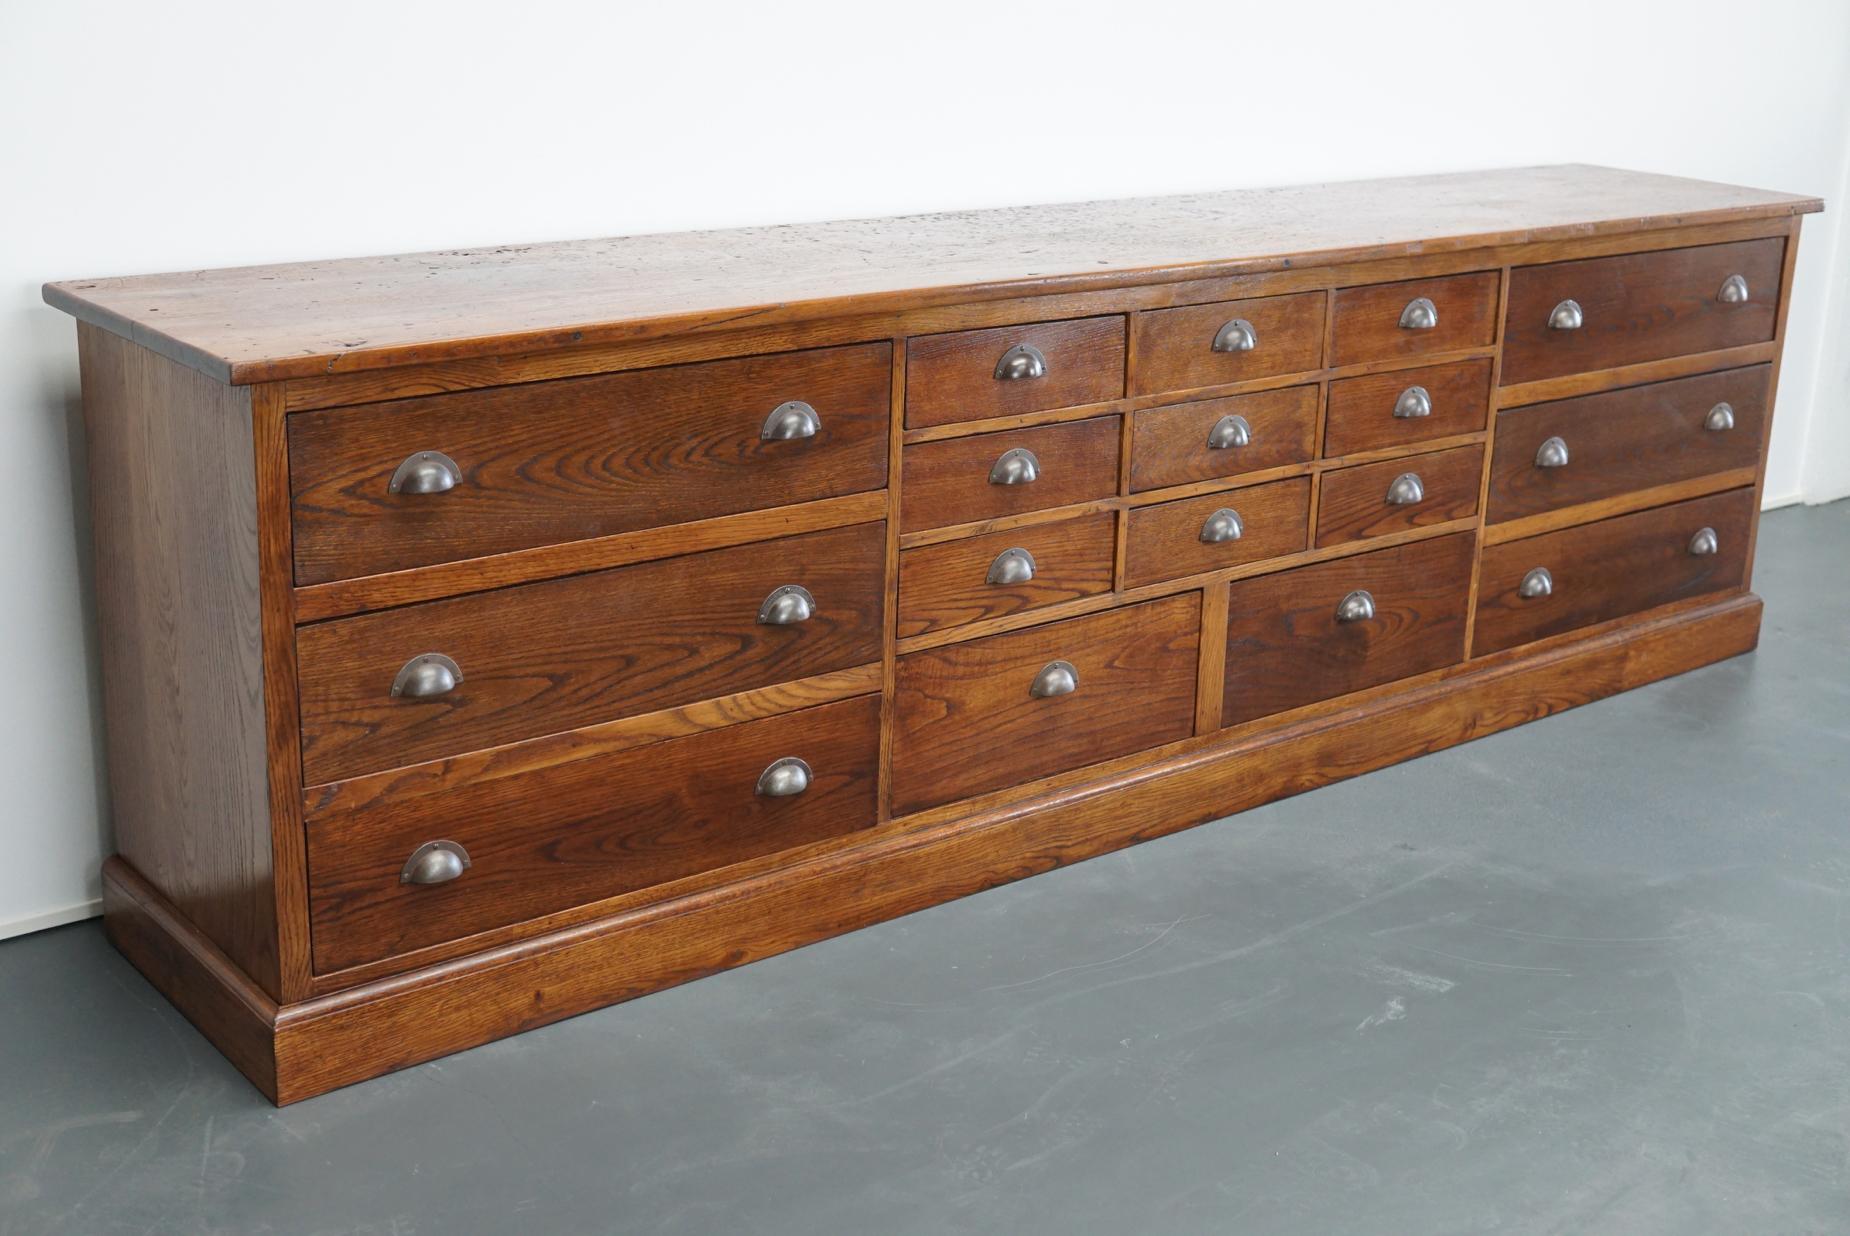 This apothecary cabinet of drawers was designed, circa 1930s in France. The piece is made from oak and features 17 drawers in different sizes with metal handles.